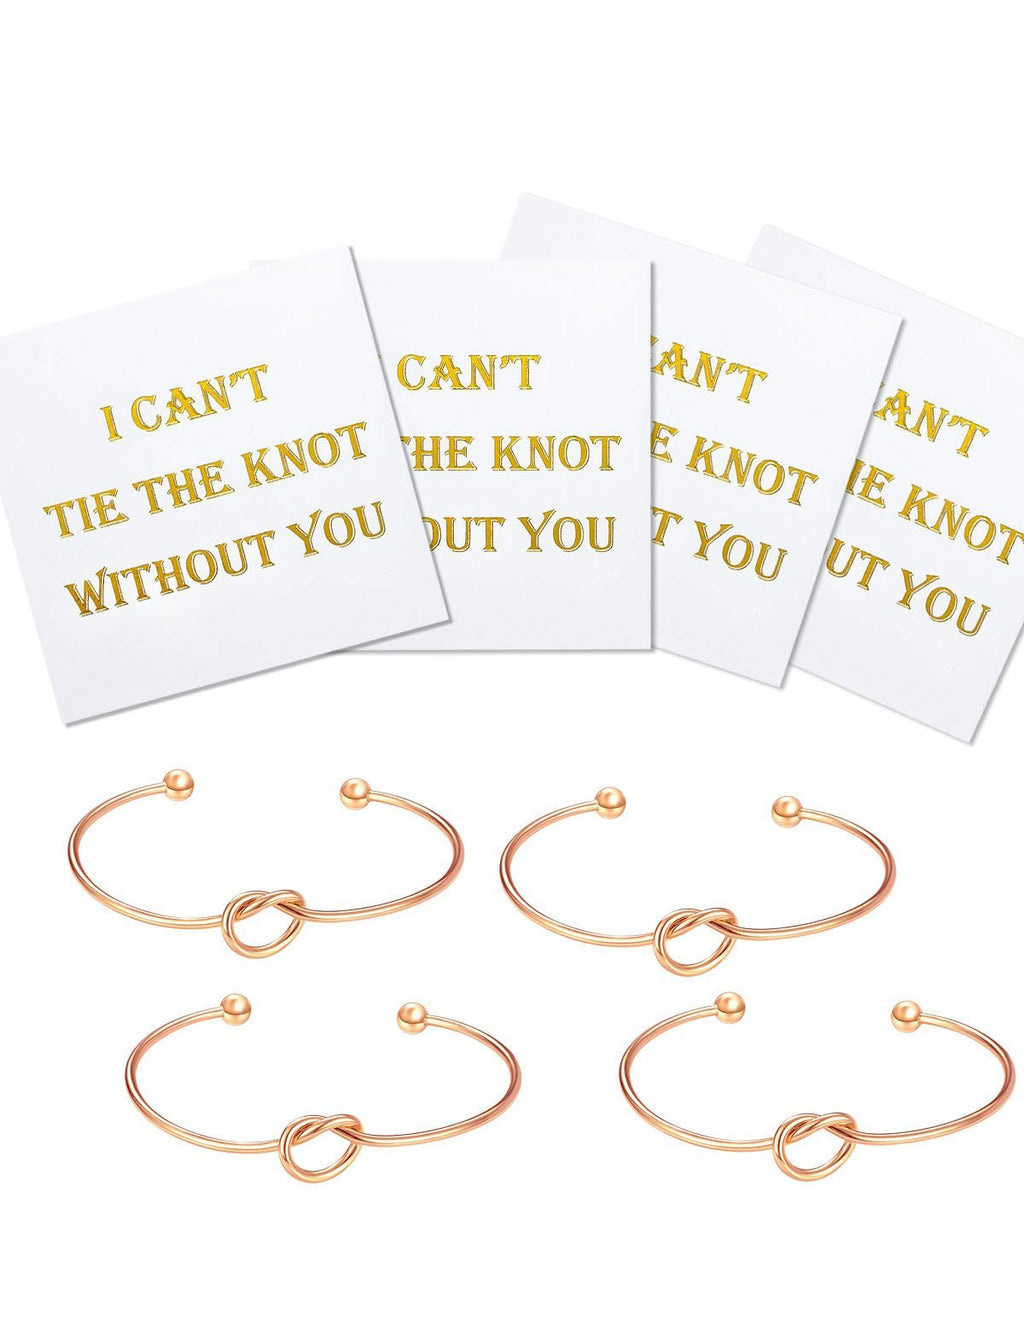 [Australia] - I Can't Tie The Knot Without You Bridesmaid Gift Cards Bridesmaid Bracelets Silver Tone- Set of 4,5,6 A. 0Rose Gold Tone 4 Sets 